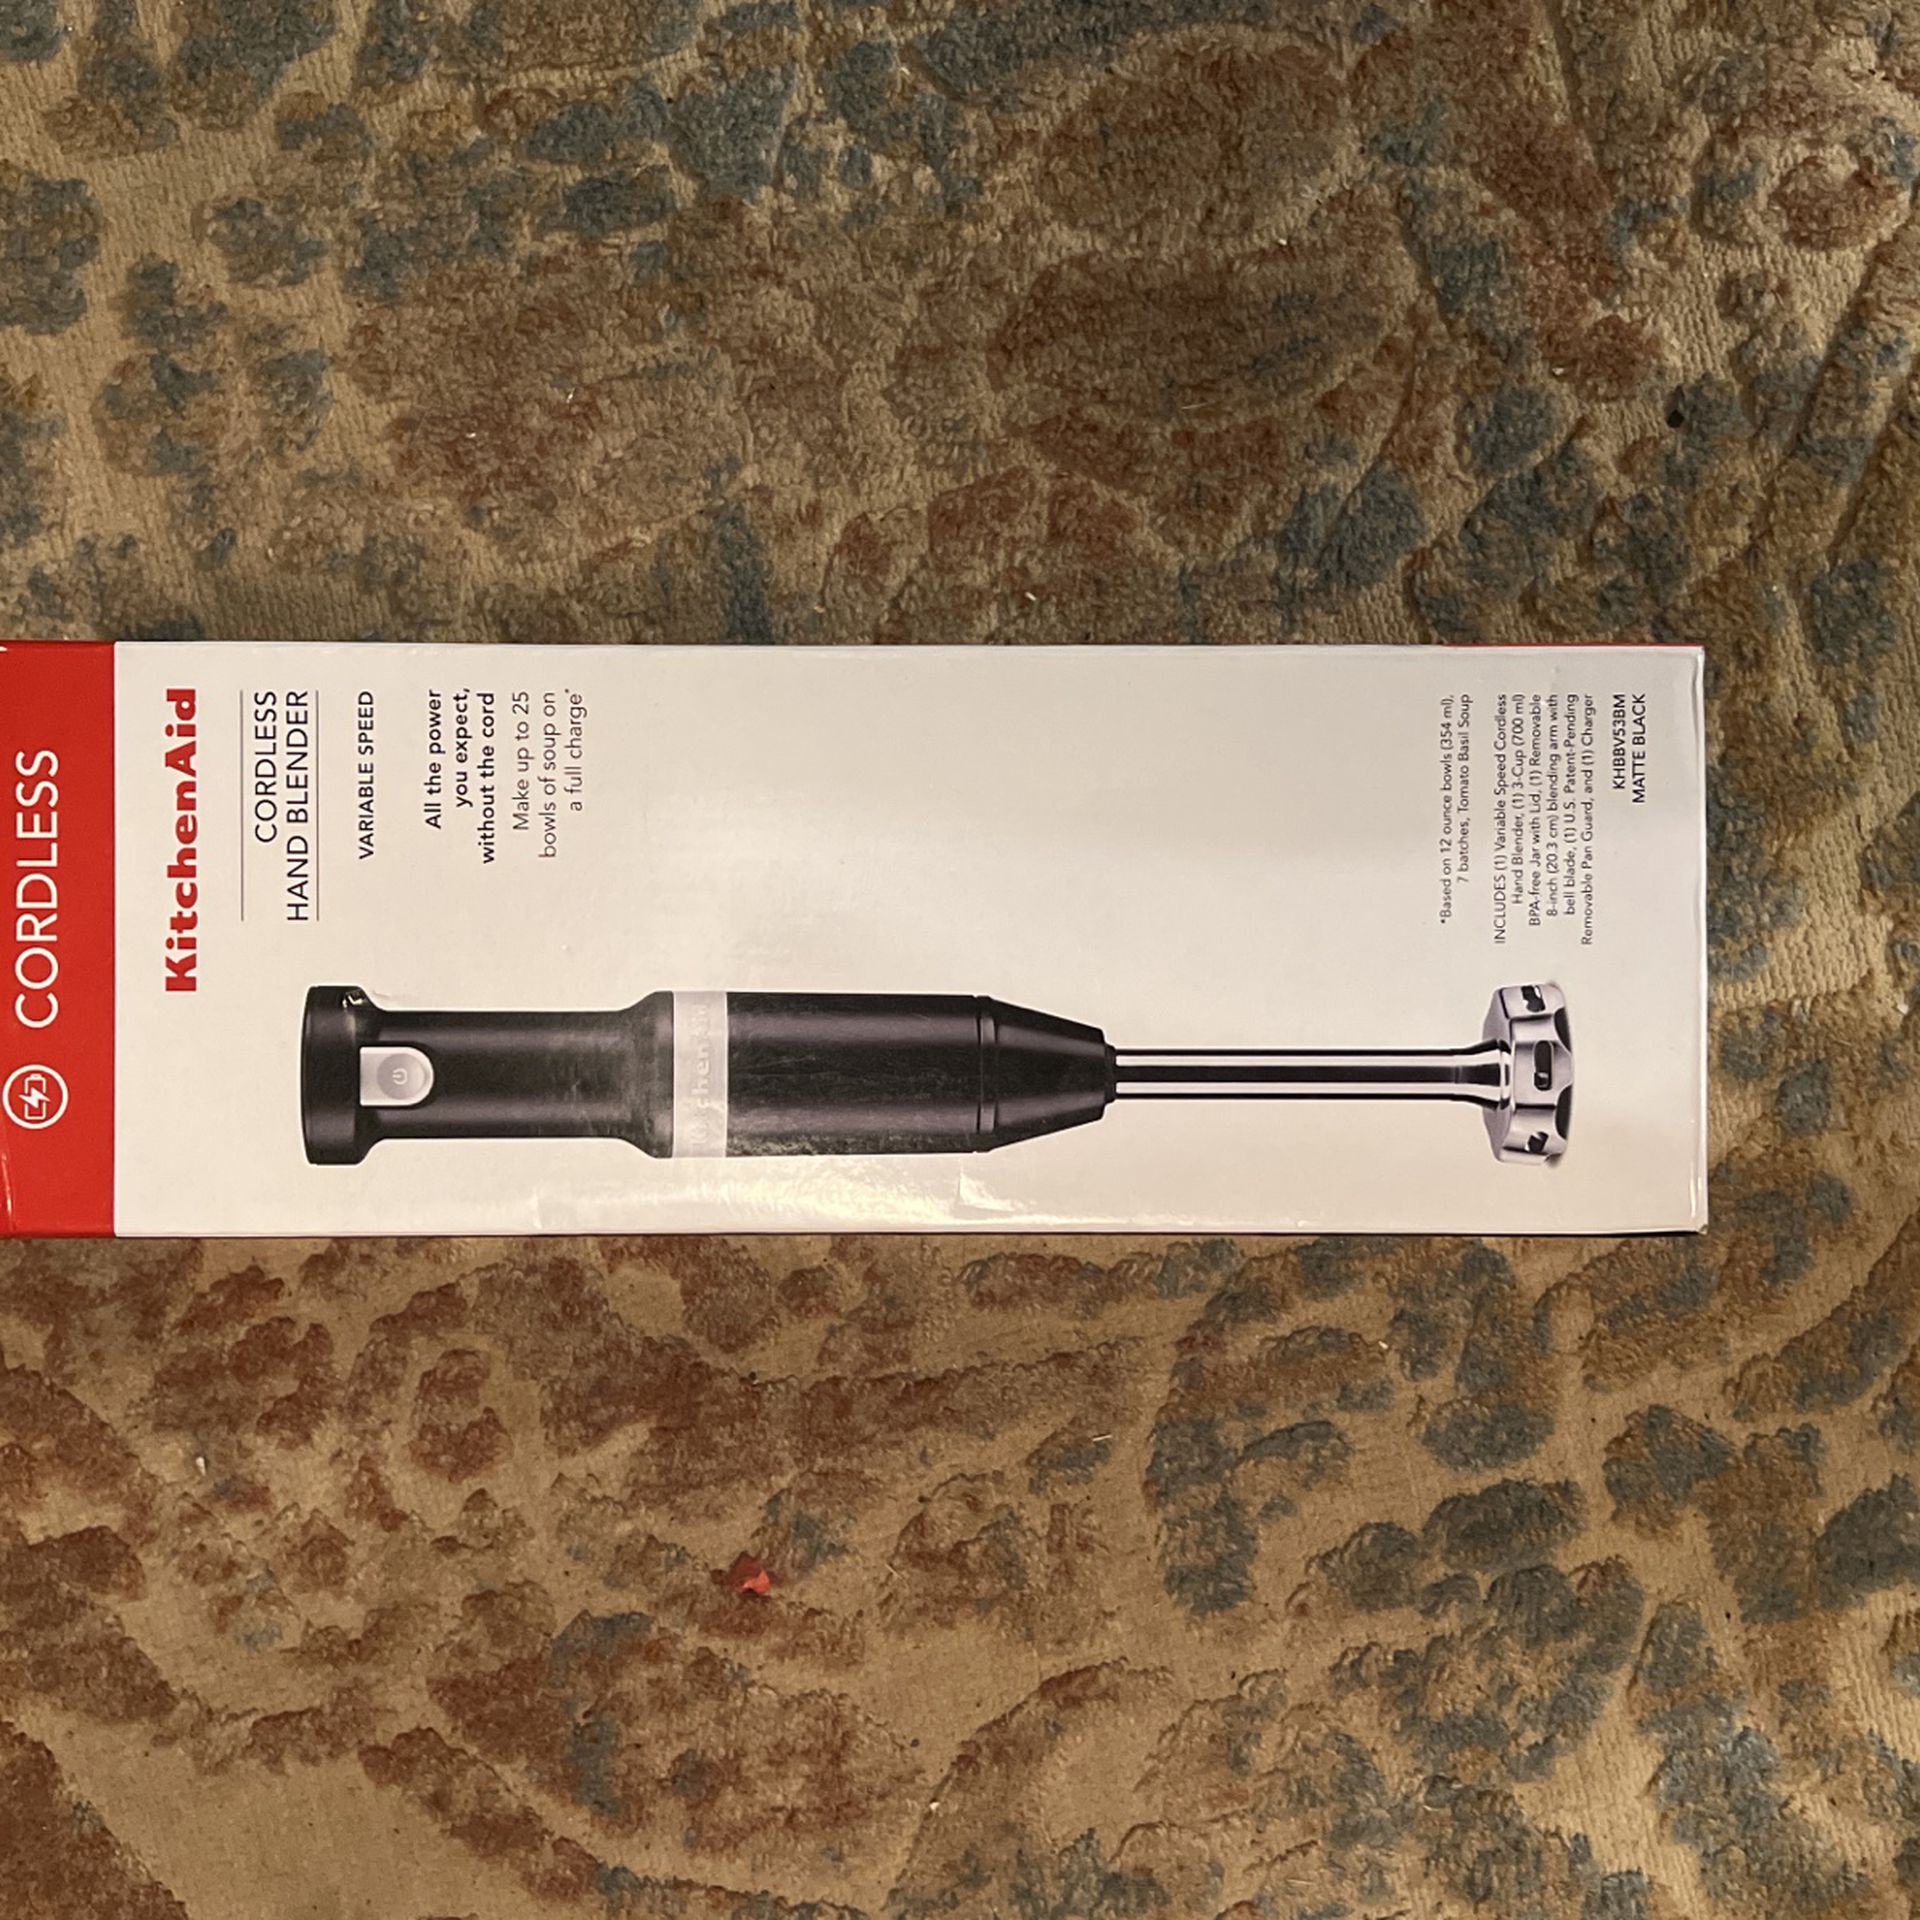 KitchenAid Cordless Hand Blender for Sale in Charlotte, NC - OfferUp